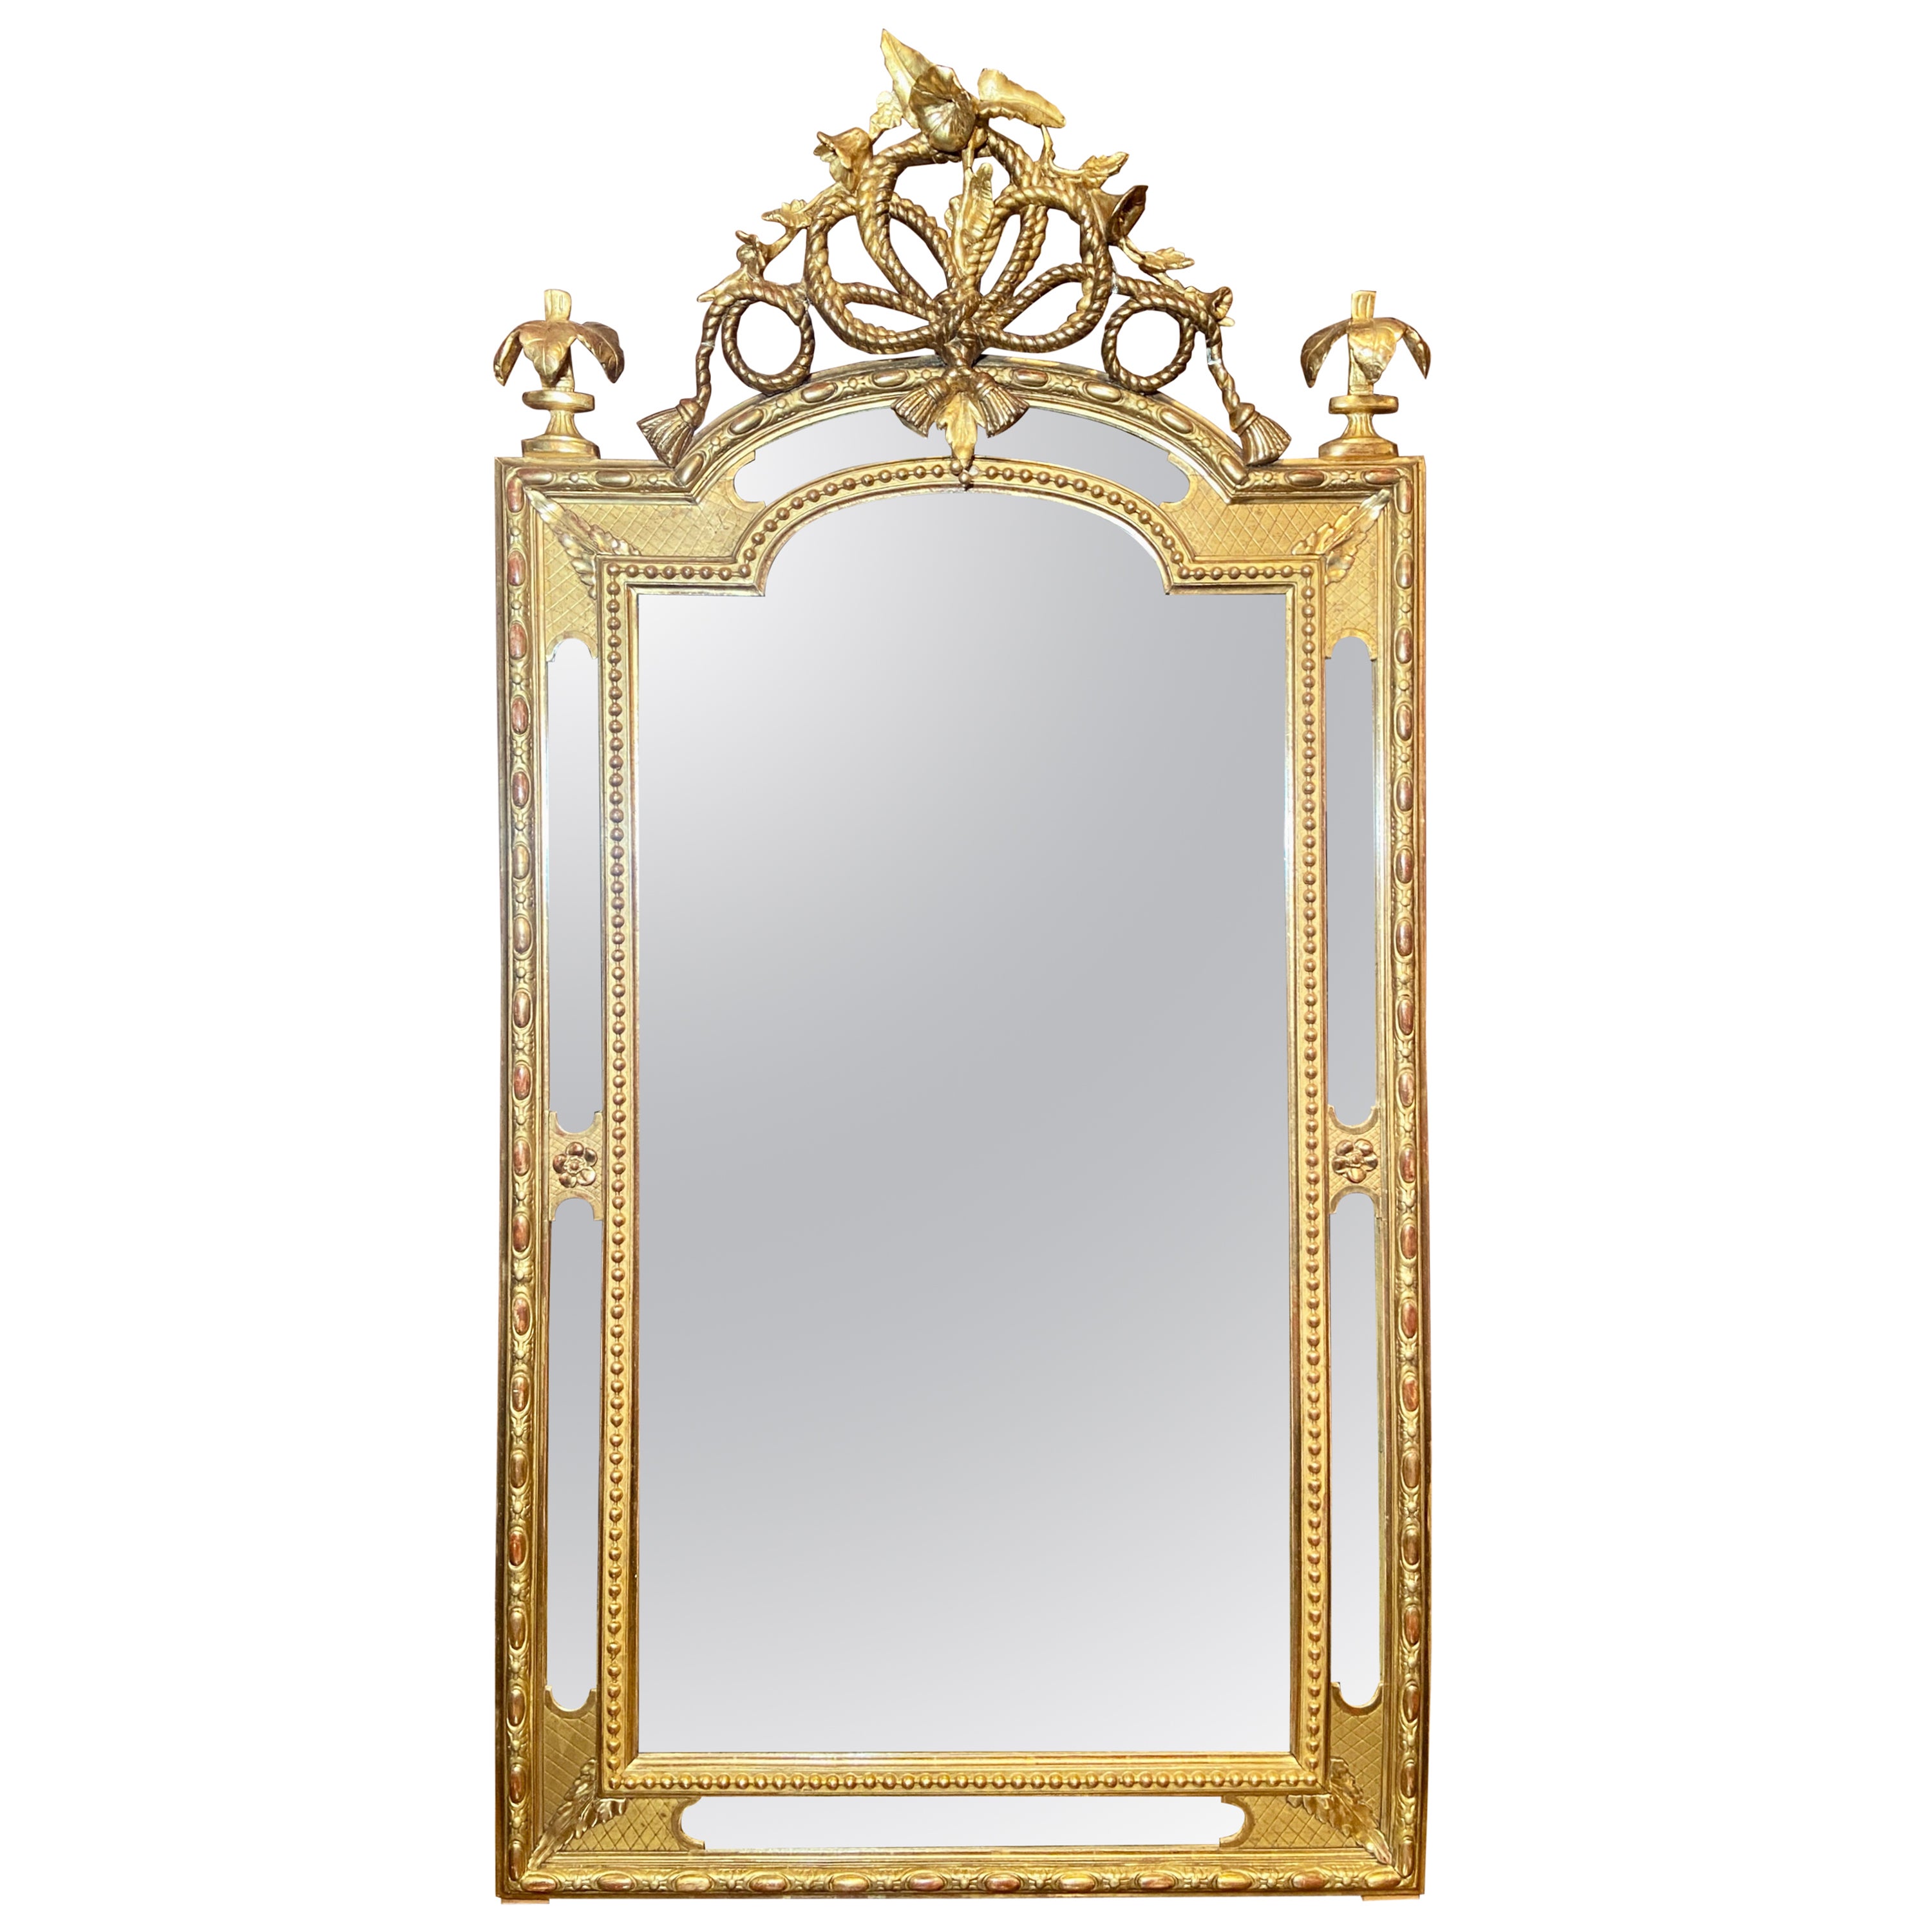 Antique 19th Century French Gold Leaf Paneled Mirror